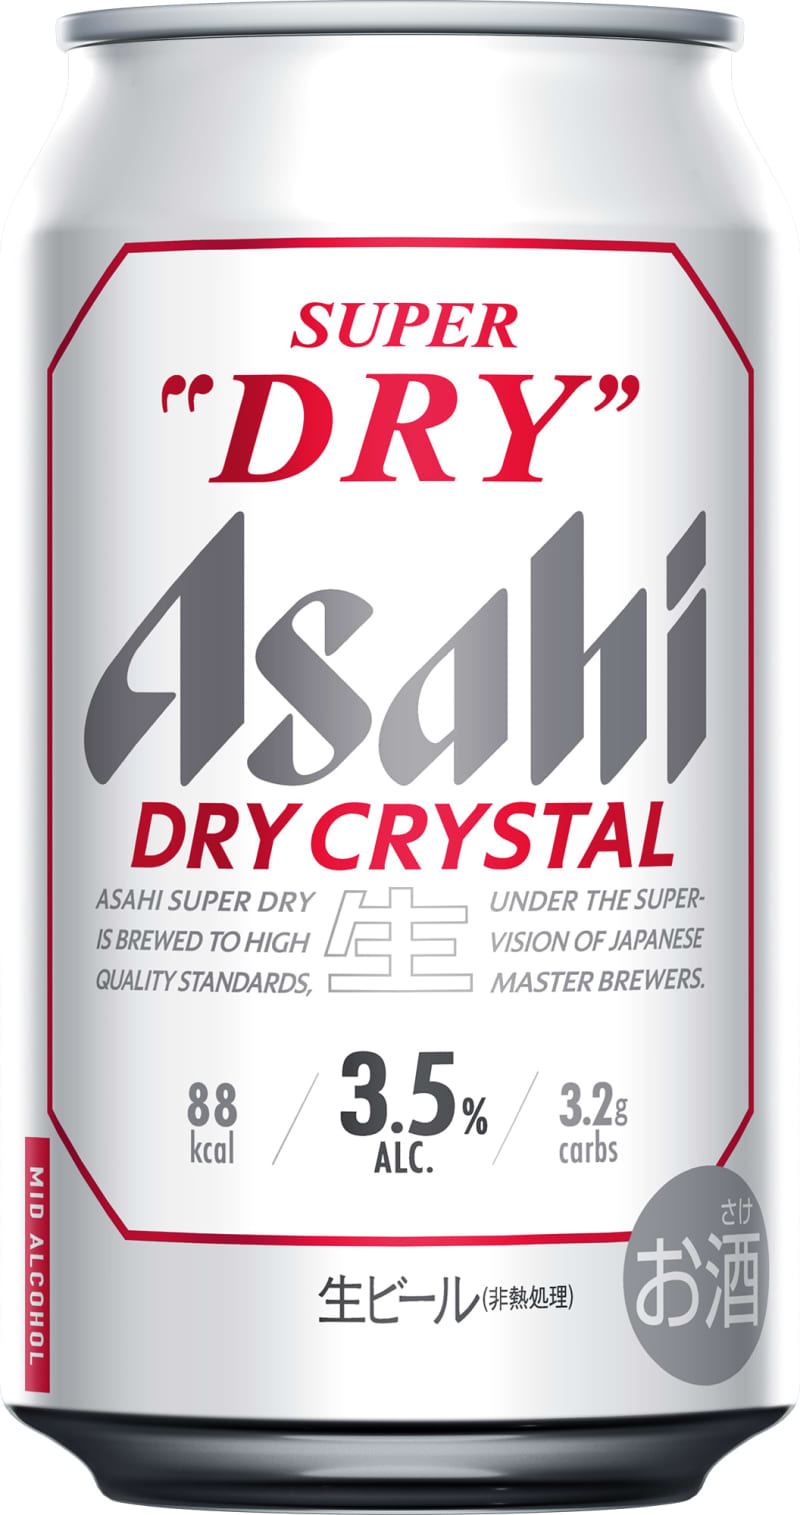 "Asahi Super Dry Dry Crystal" released on October 10